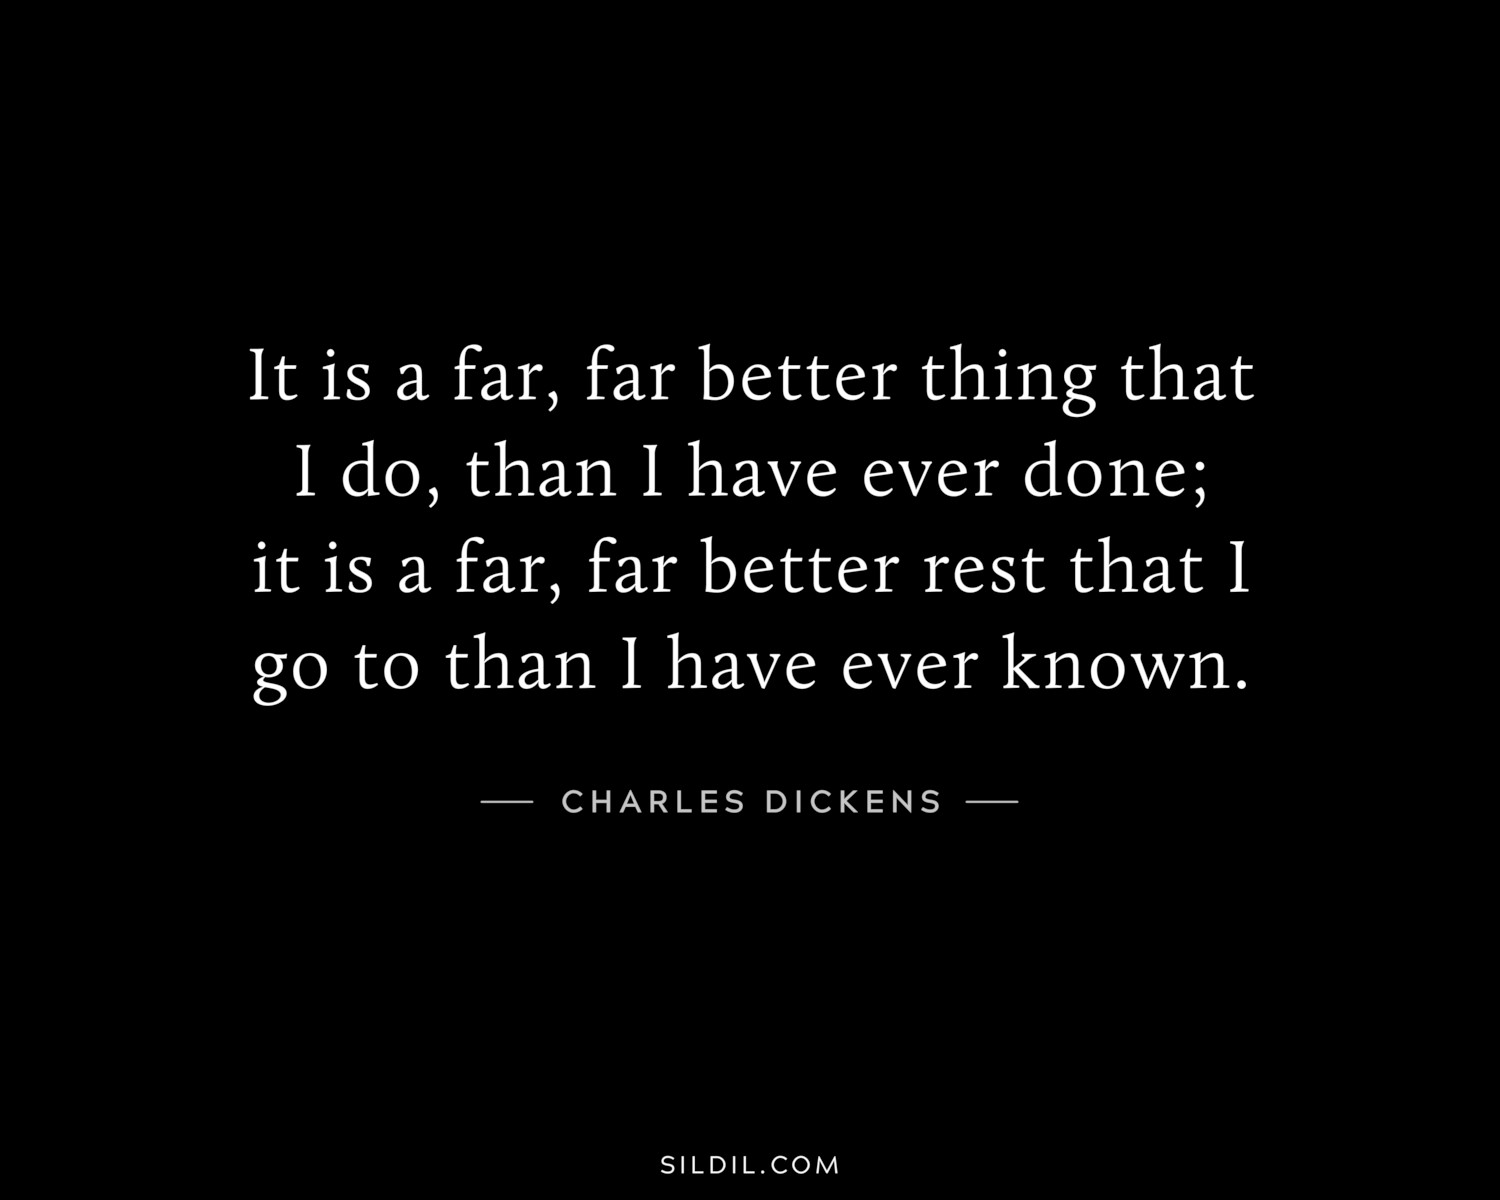 It is a far, far better thing that I do, than I have ever done; it is a far, far better rest that I go to than I have ever known.